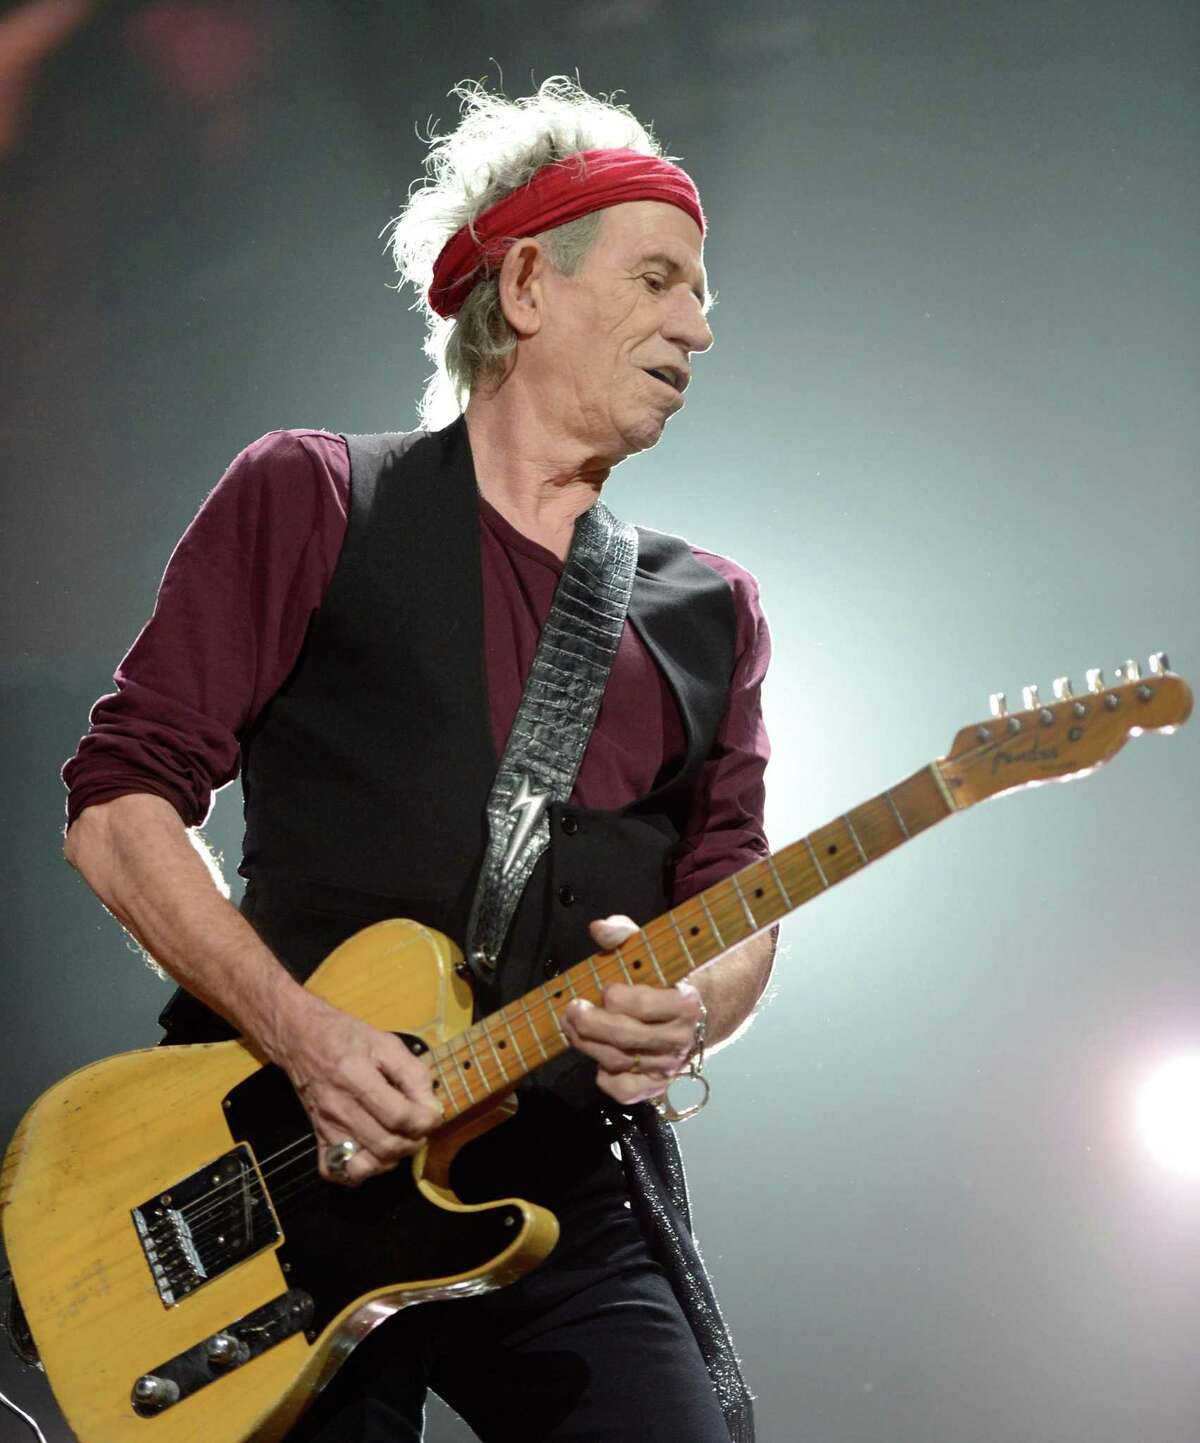 NEW YORK, NY - DECEMBER 12: Keith Richards of The Rolling Stones performs at "12-12-12" a concert benefiting The Robin Hood Relief Fund to aid the victims of Hurricane Sandy presented by Clear Channel Media & Entertainment, The Madison Square Garden Company and The Weinstein Company at Madison Square Garden on December 12, 2012 in New York City. (Photo by Kevin Mazur/WireImage for Clear Channel)